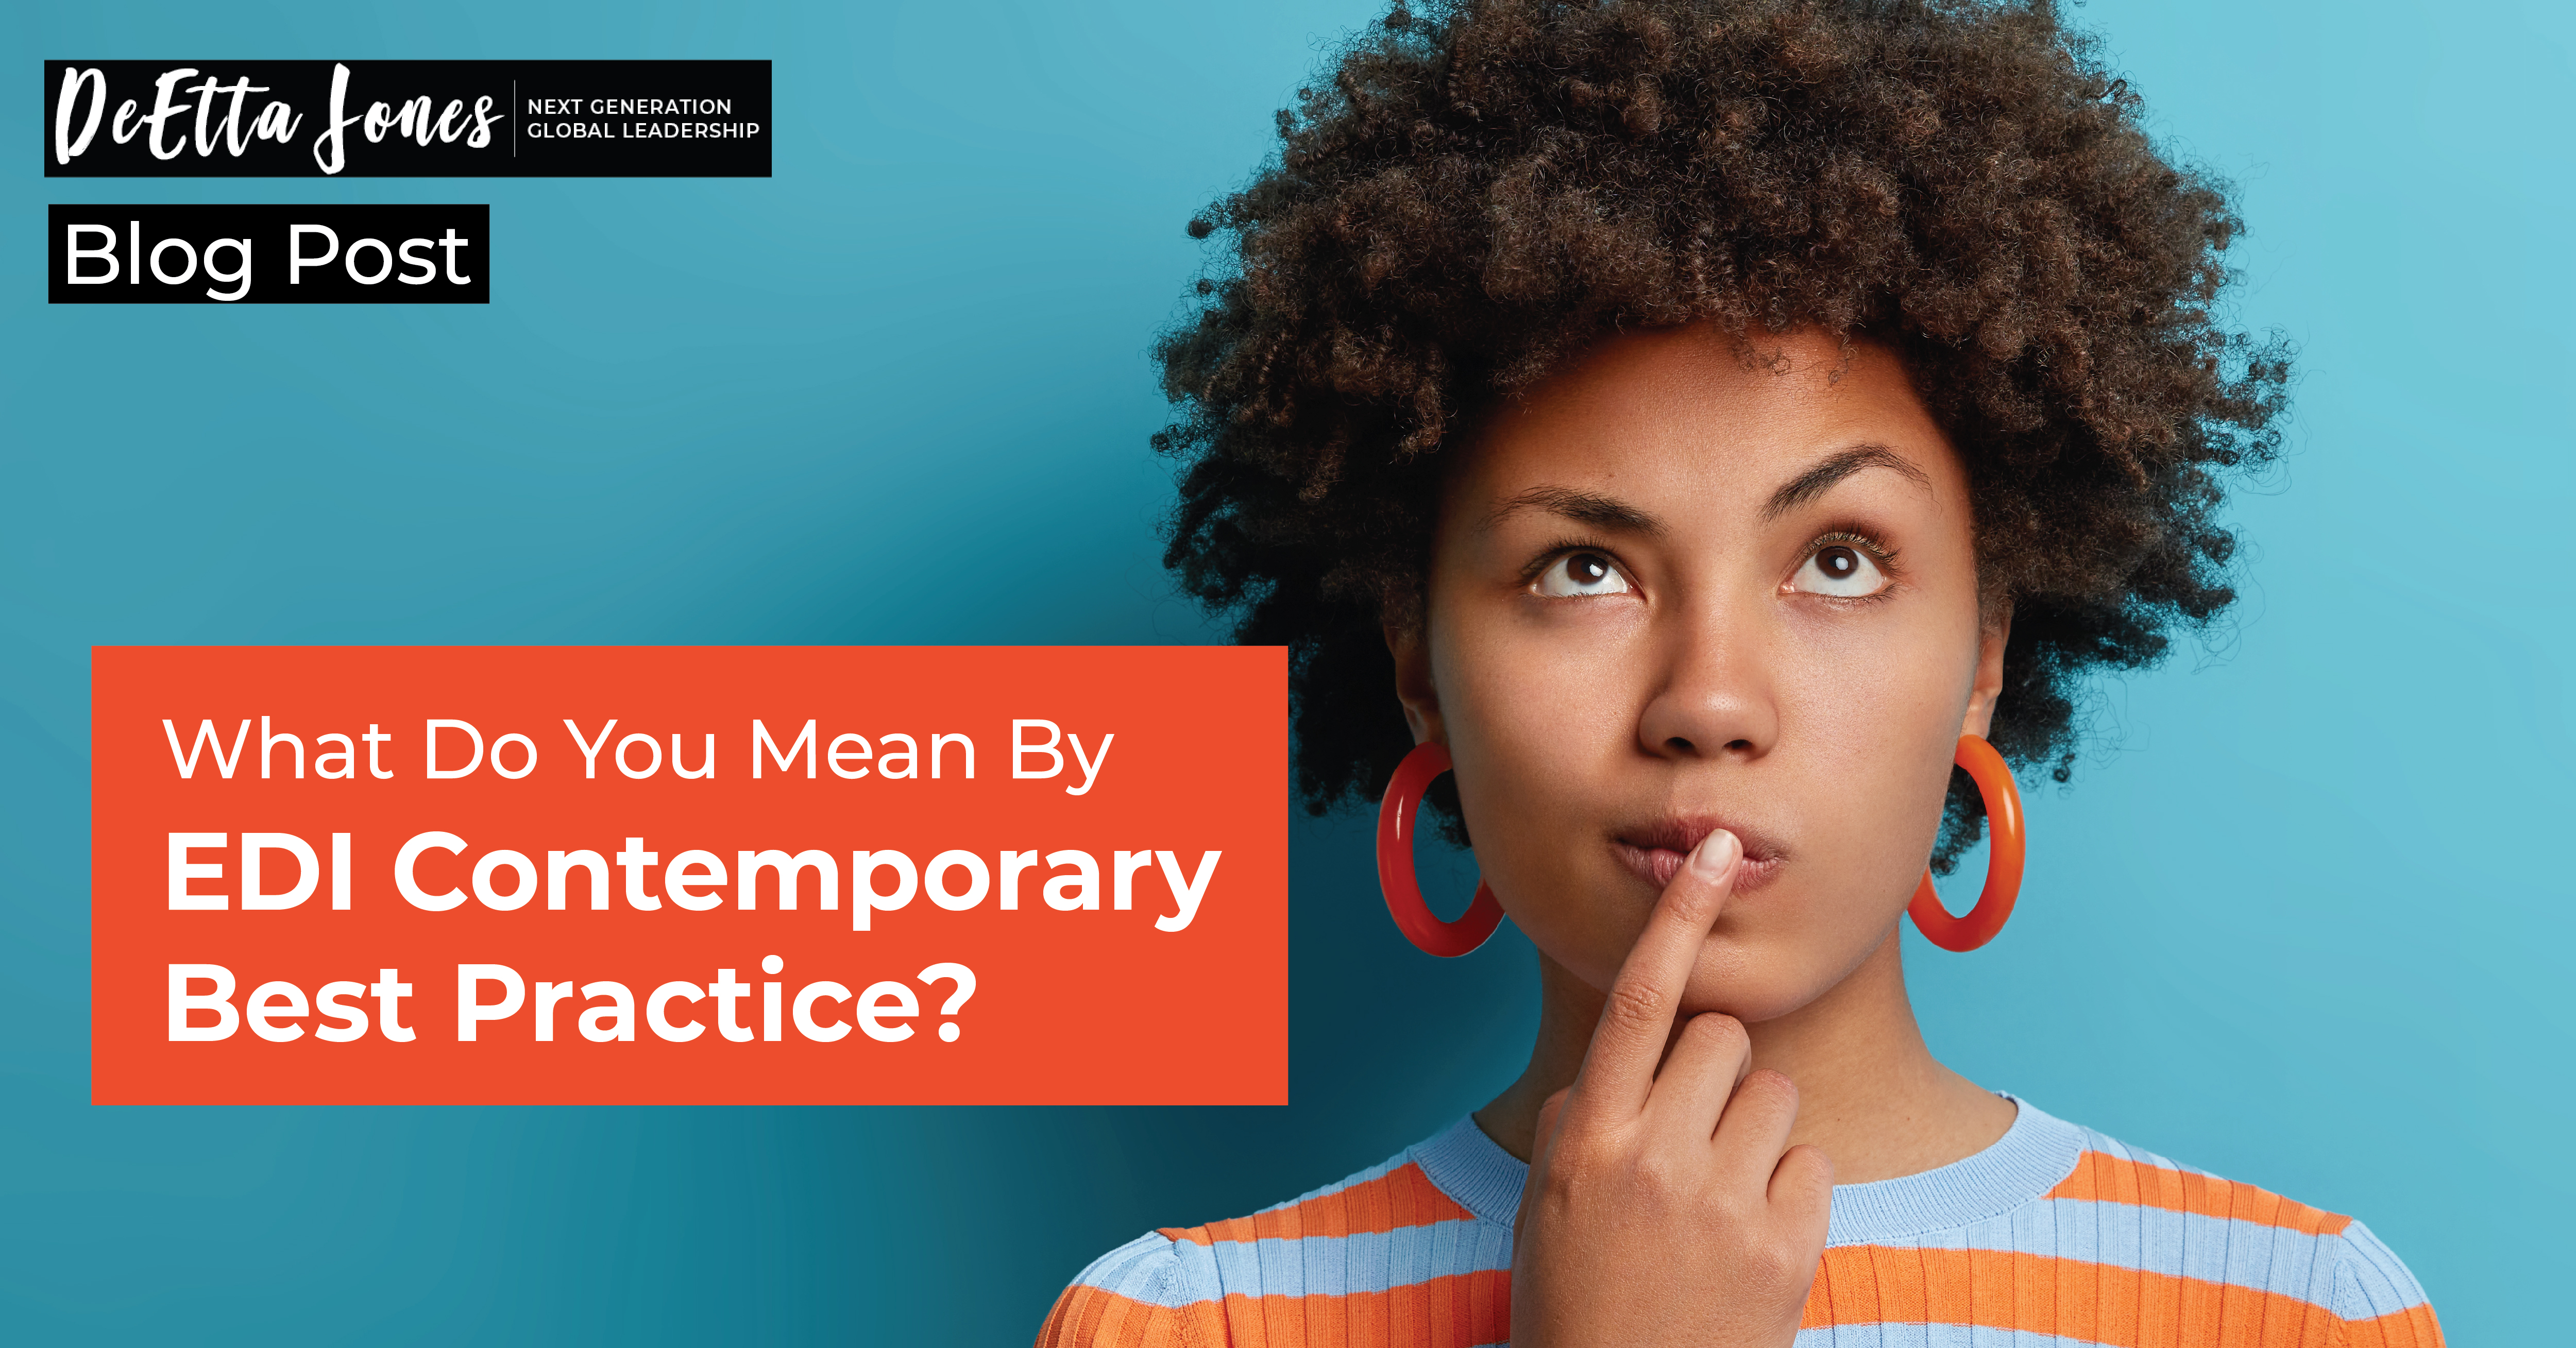 What Do You Mean by “EDI Contemporary Best Practice”?